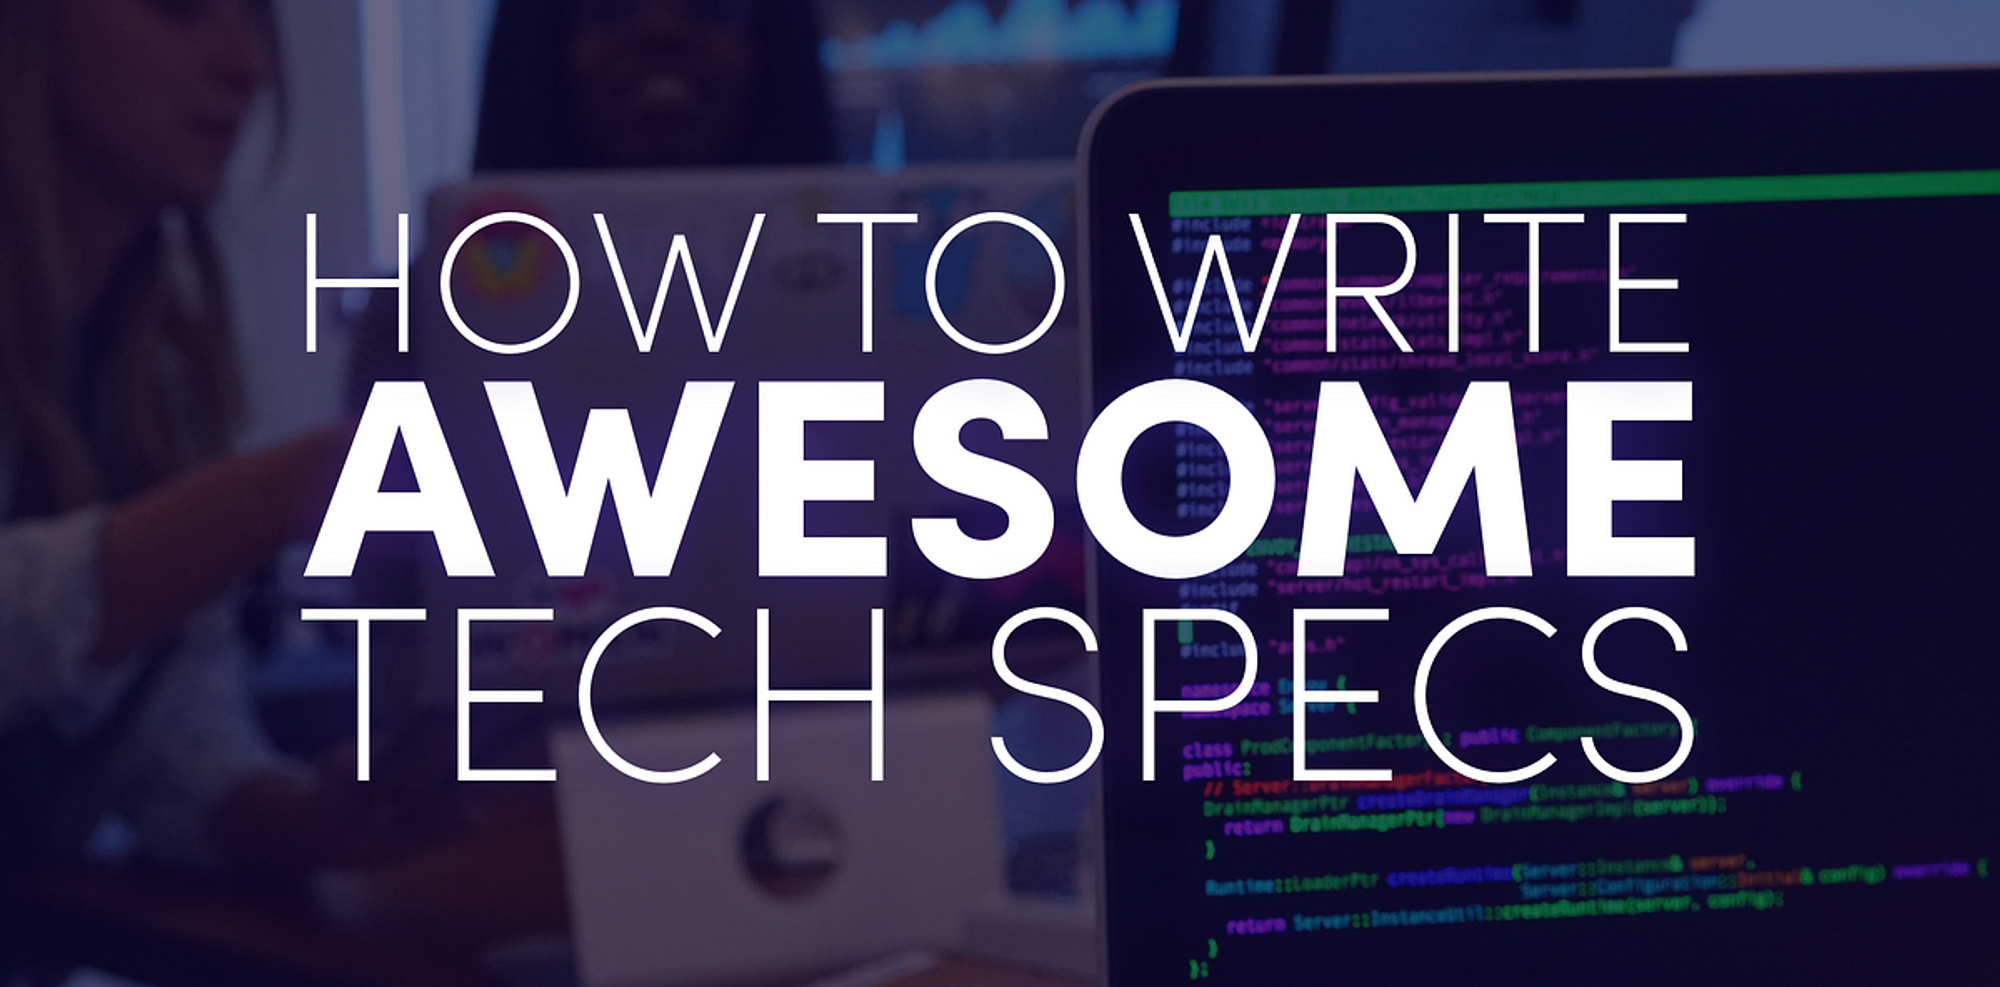 How to Write Awesome Tech Specs